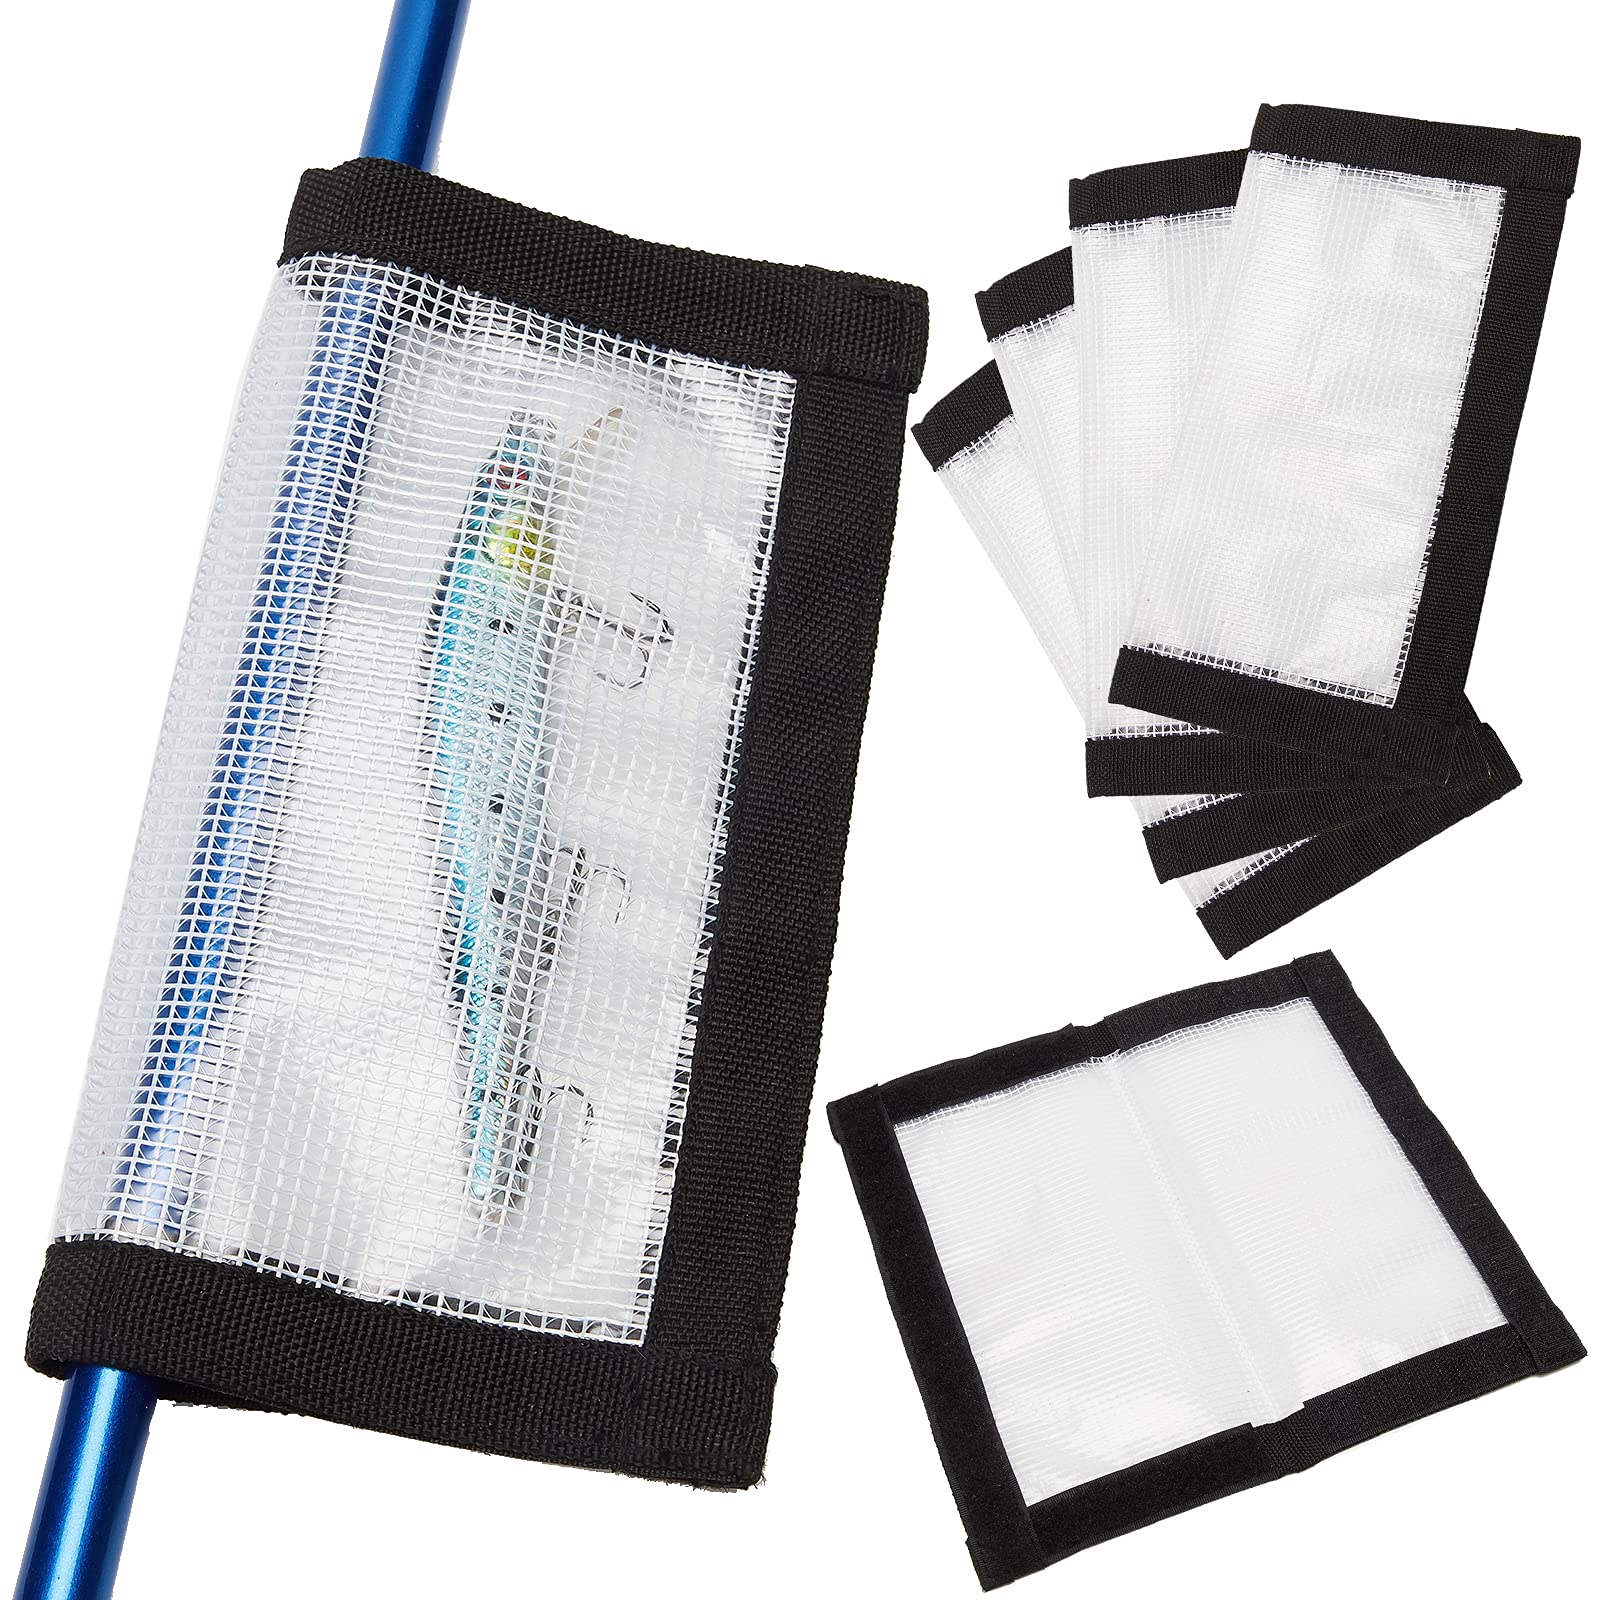 MOOCY Fishing Lure Covers for Rod, Fabric Hook Protectors Wraps (Clear -  4PK) Black - 4PK